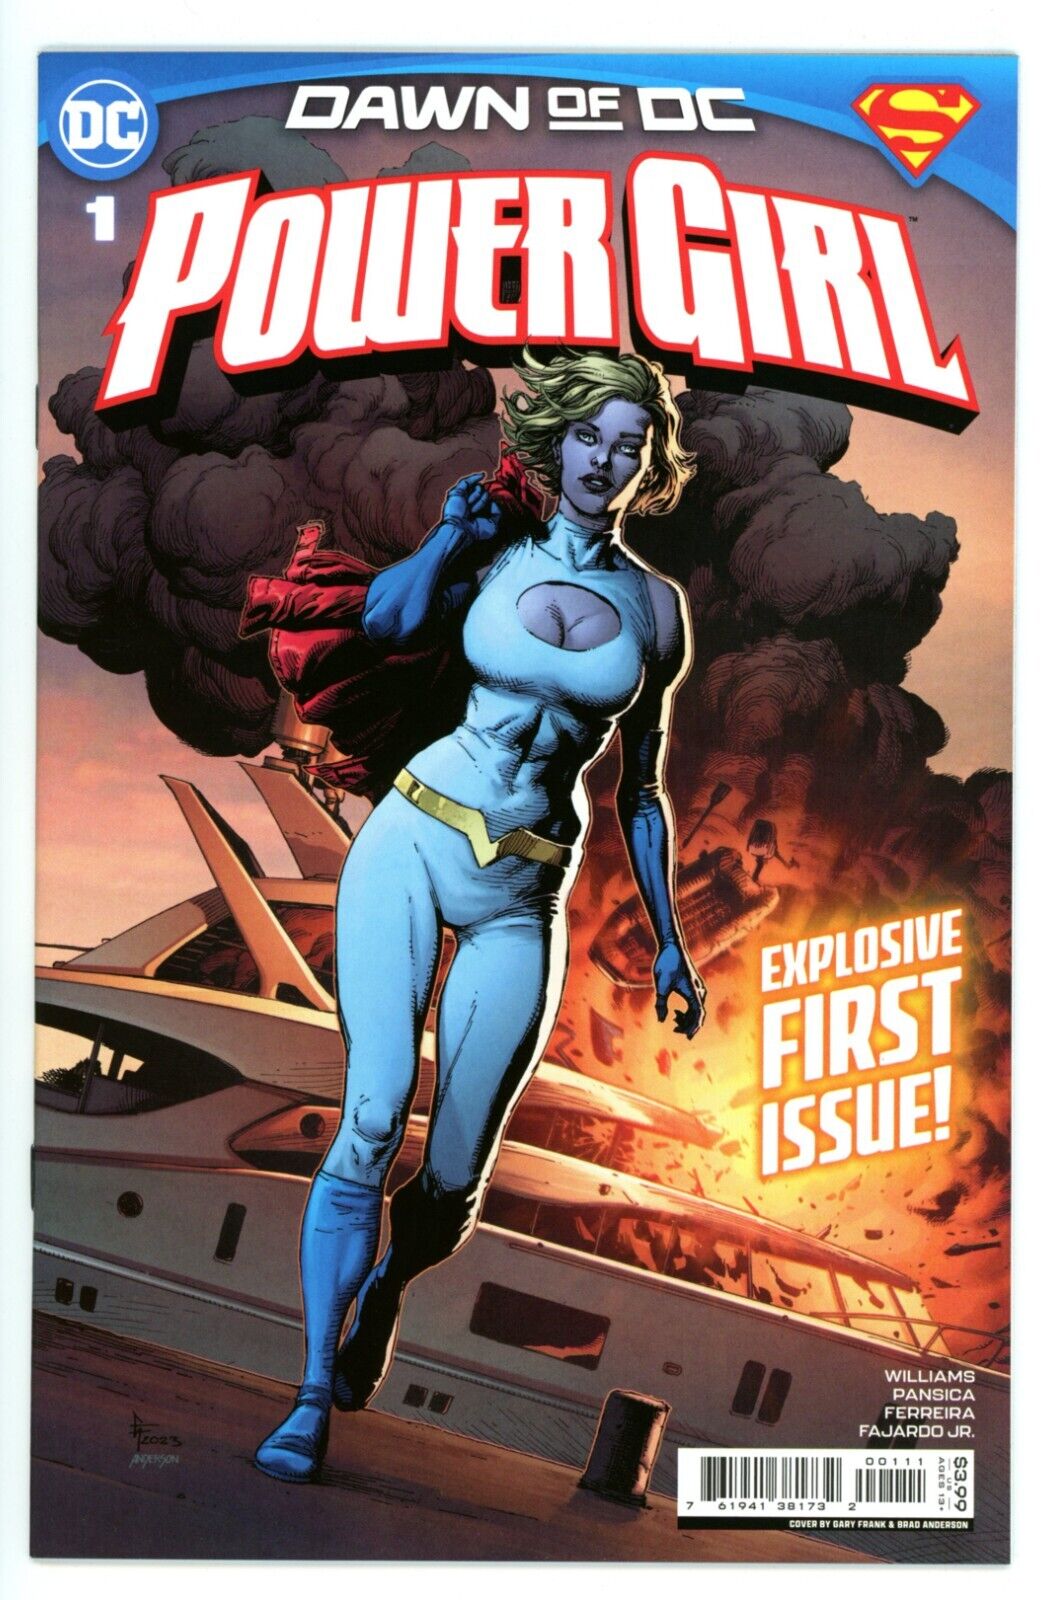 Power Girl #1  |  Cover A   |   NM  NEW  ⭐ NO STOCK PHOTOS USED ⭐